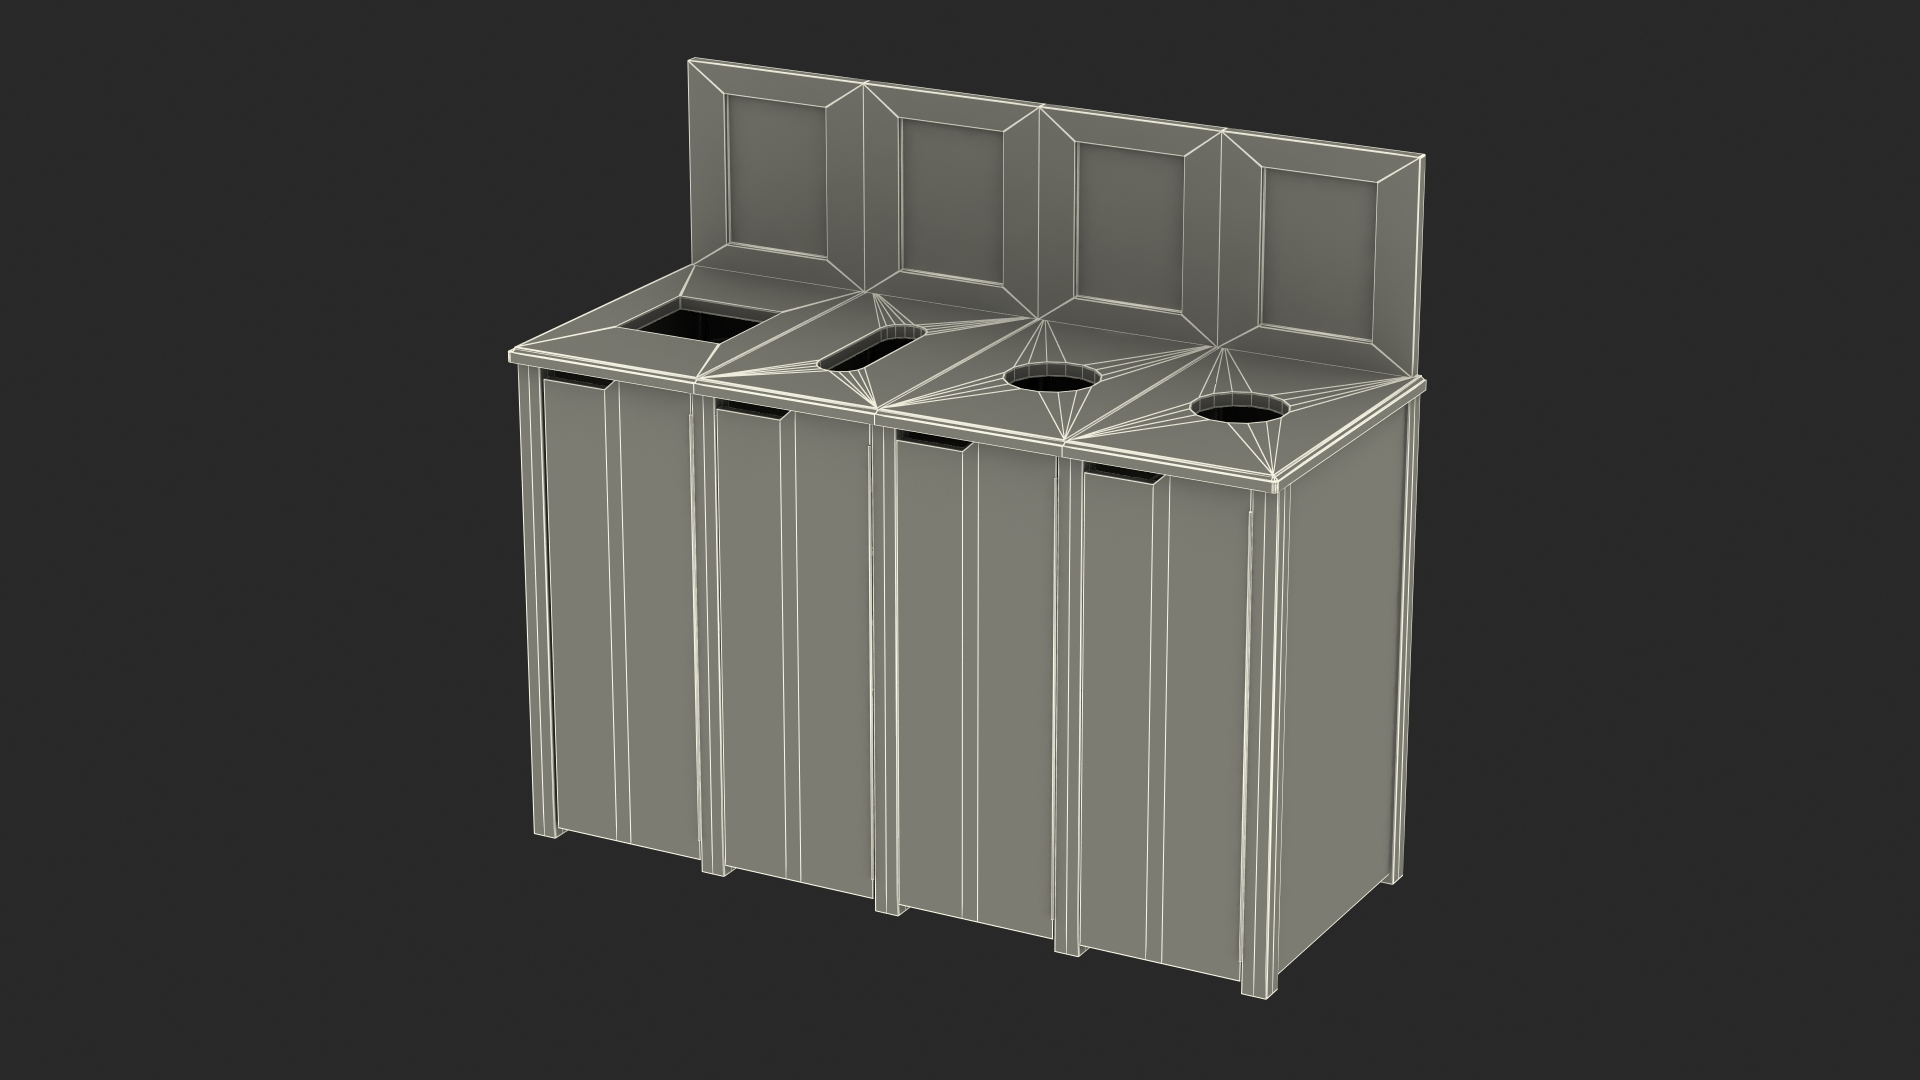 Sortmate Modular Sorting Bins, for Those Who Still Bother Recycling - Core77